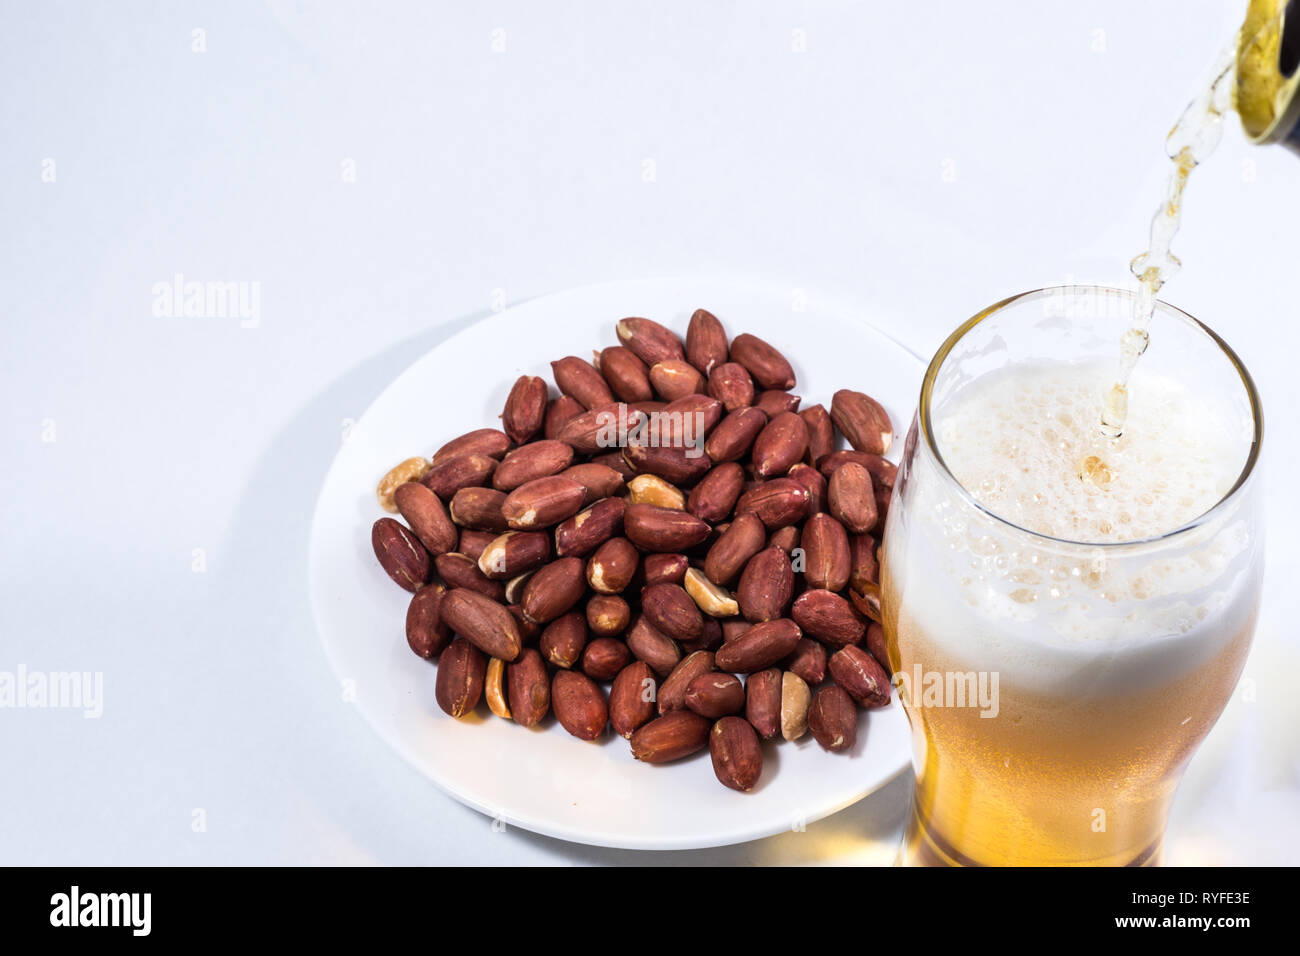 Beer is poured into a glass and peanuts in the saucer. Stock Photo